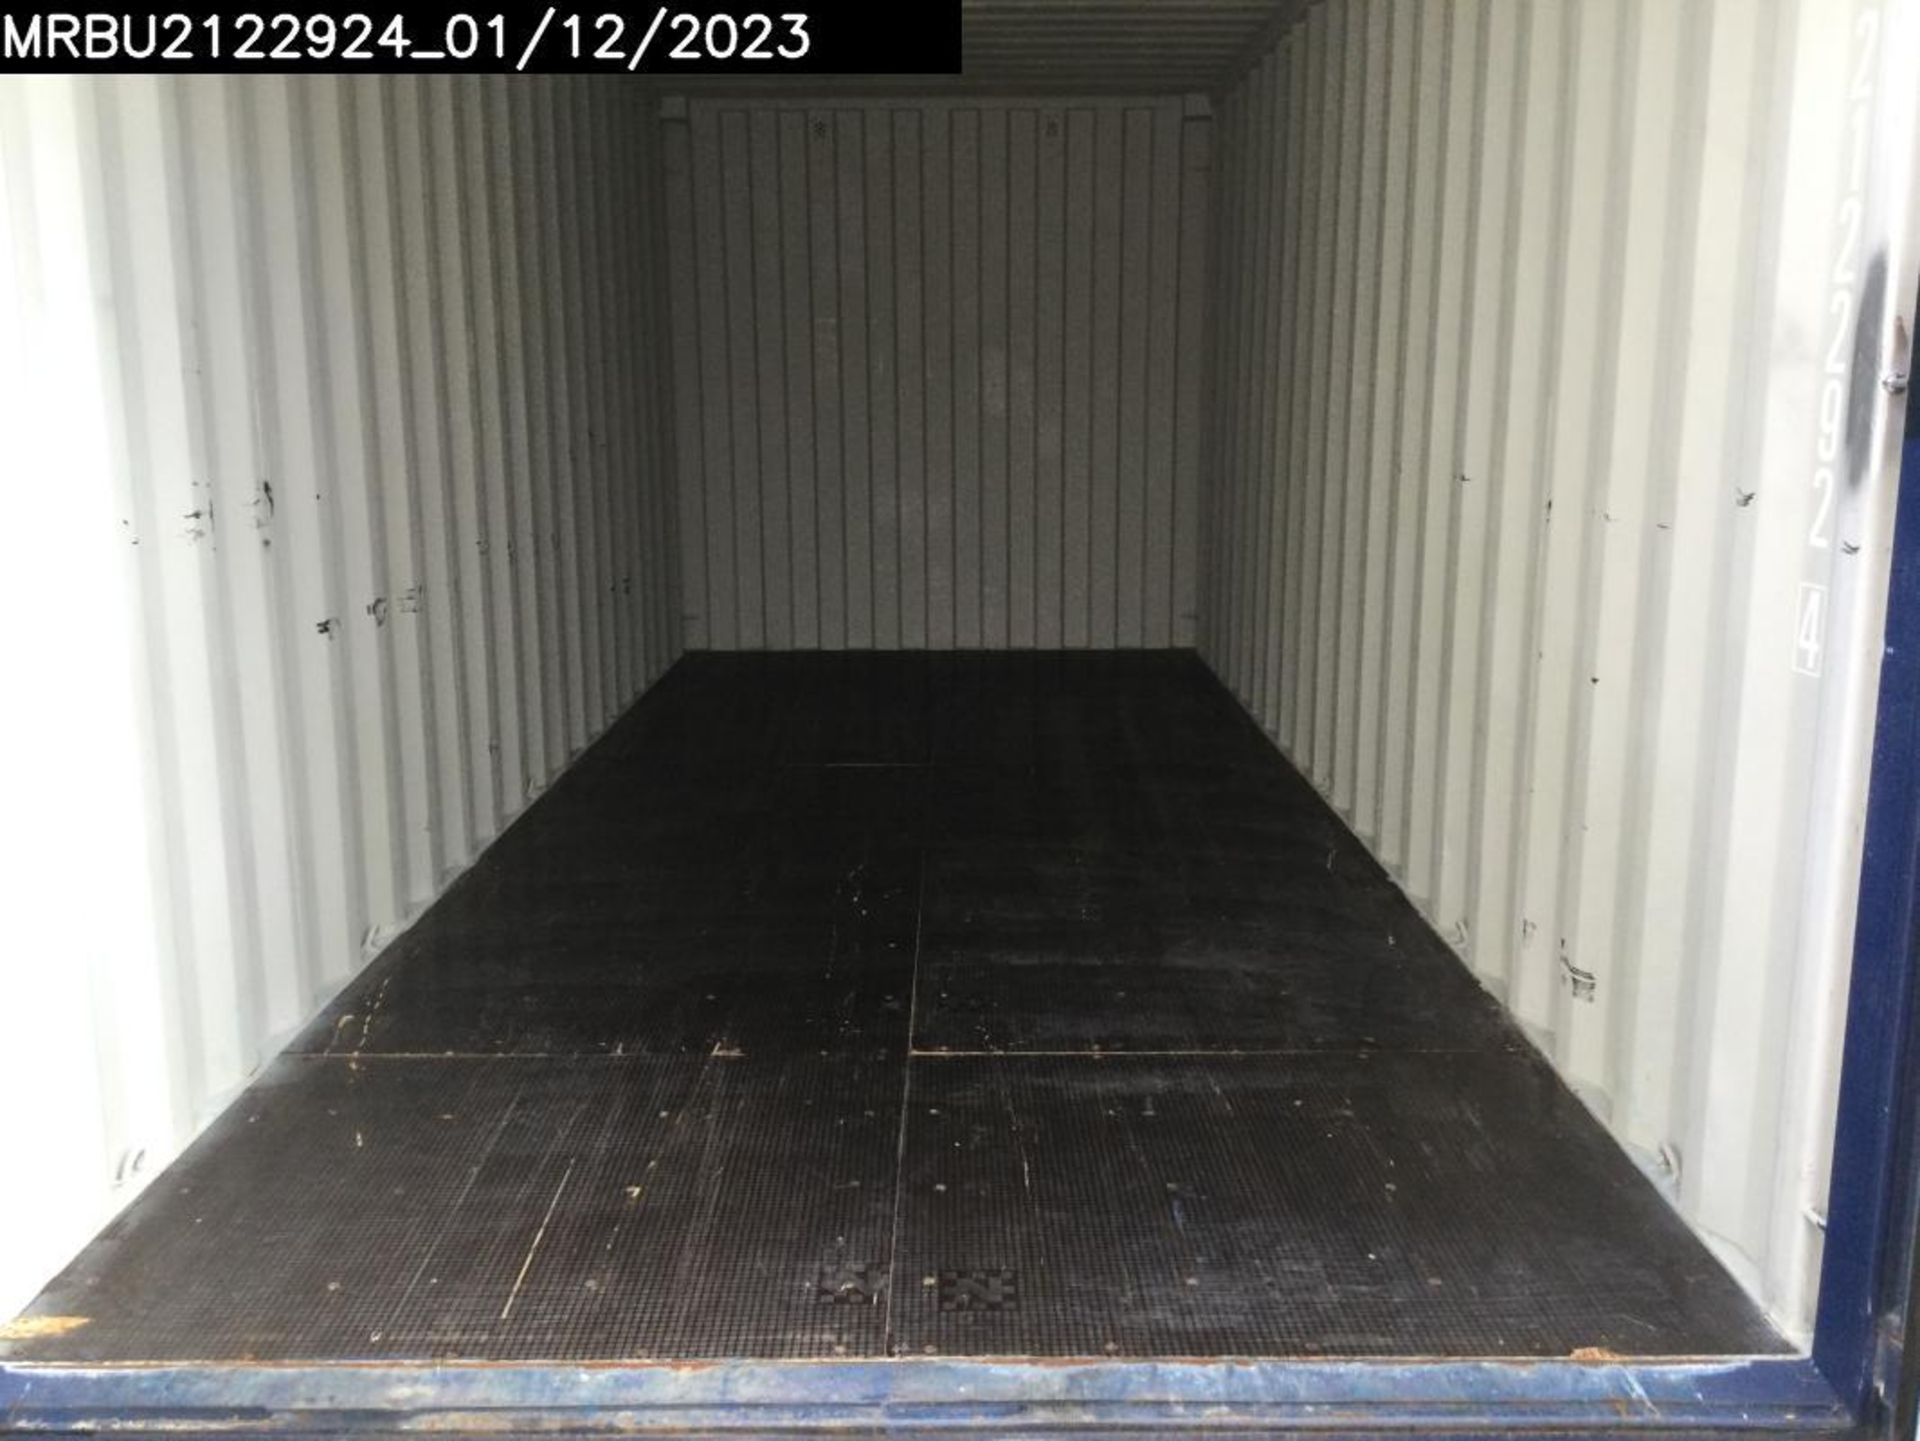 One Trip 20ft Shipping Container - Unit Number – MRBU2122924 - Bild 5 aus 5